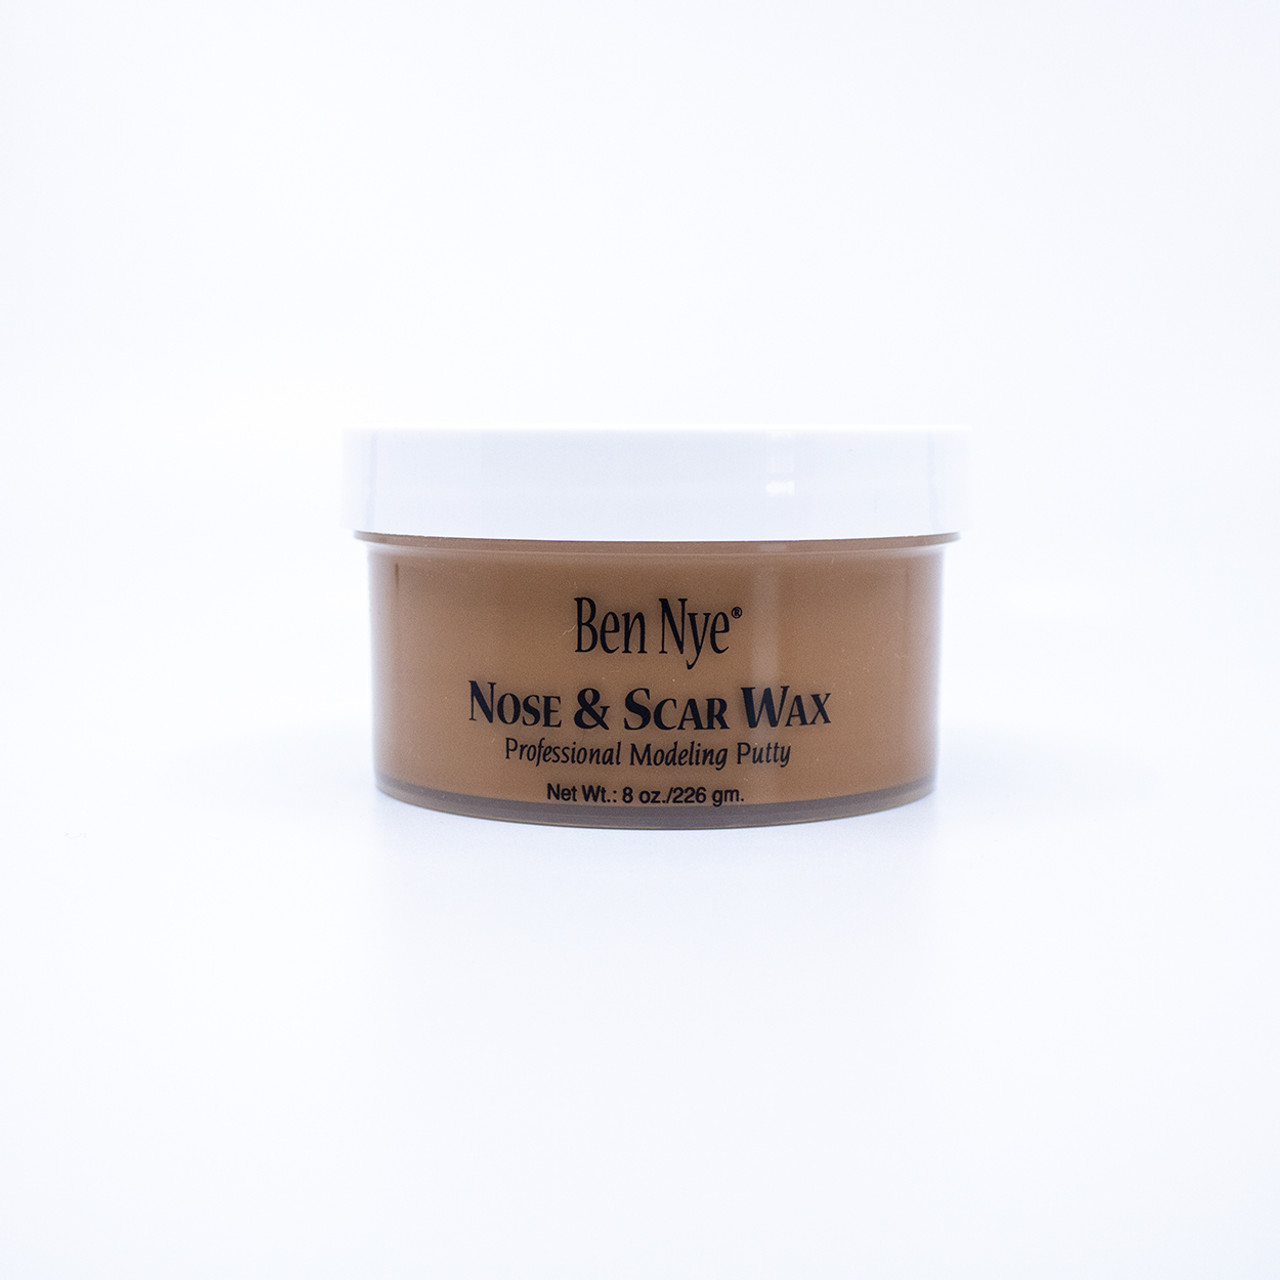 How to use Nose & Scar Wax by Ben Nye